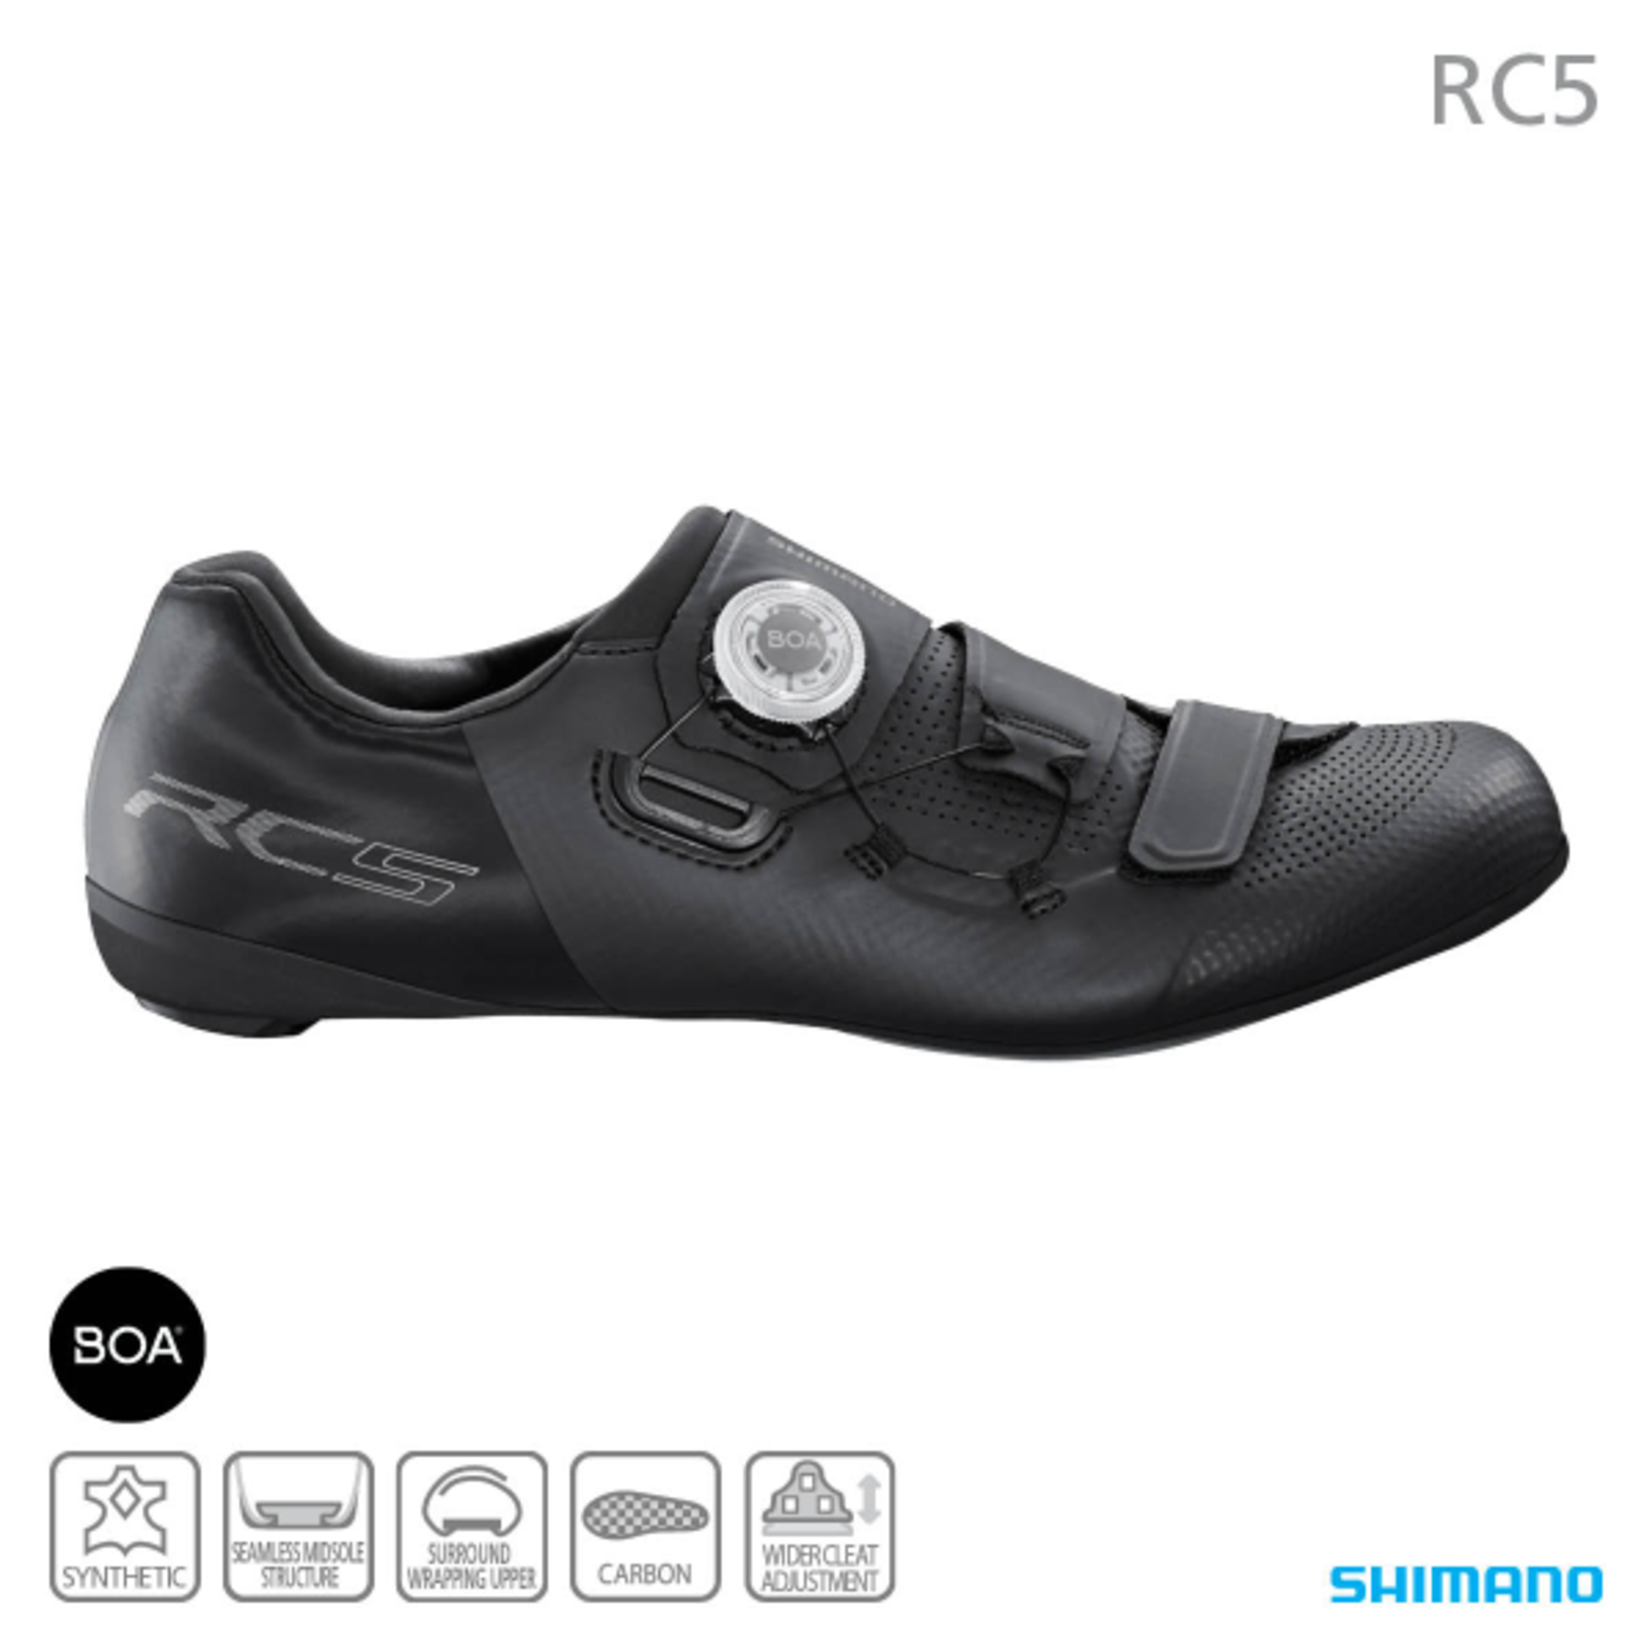 Shimano Shimano SH-RC502 Road Bike Cycling Shoes - Black Synthetic Leather Material